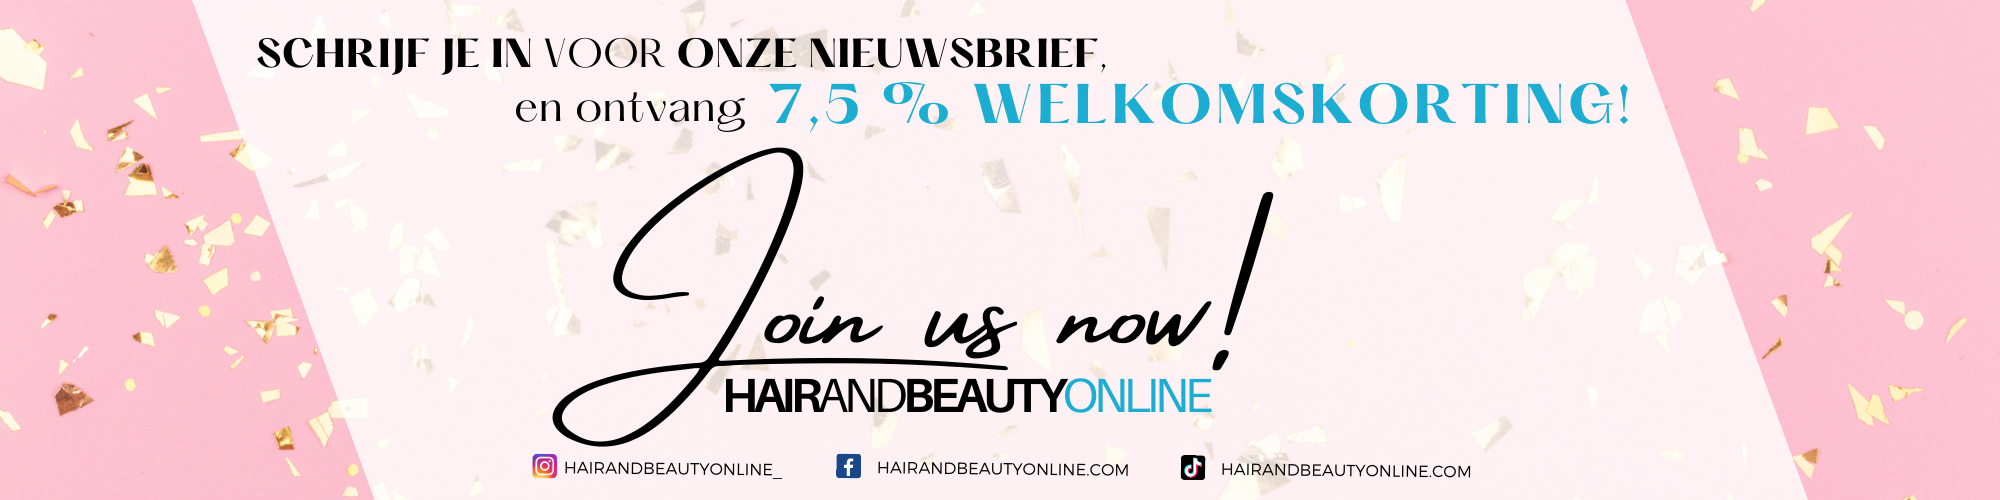 Hair and Beauty Specialiste Europa banner 1